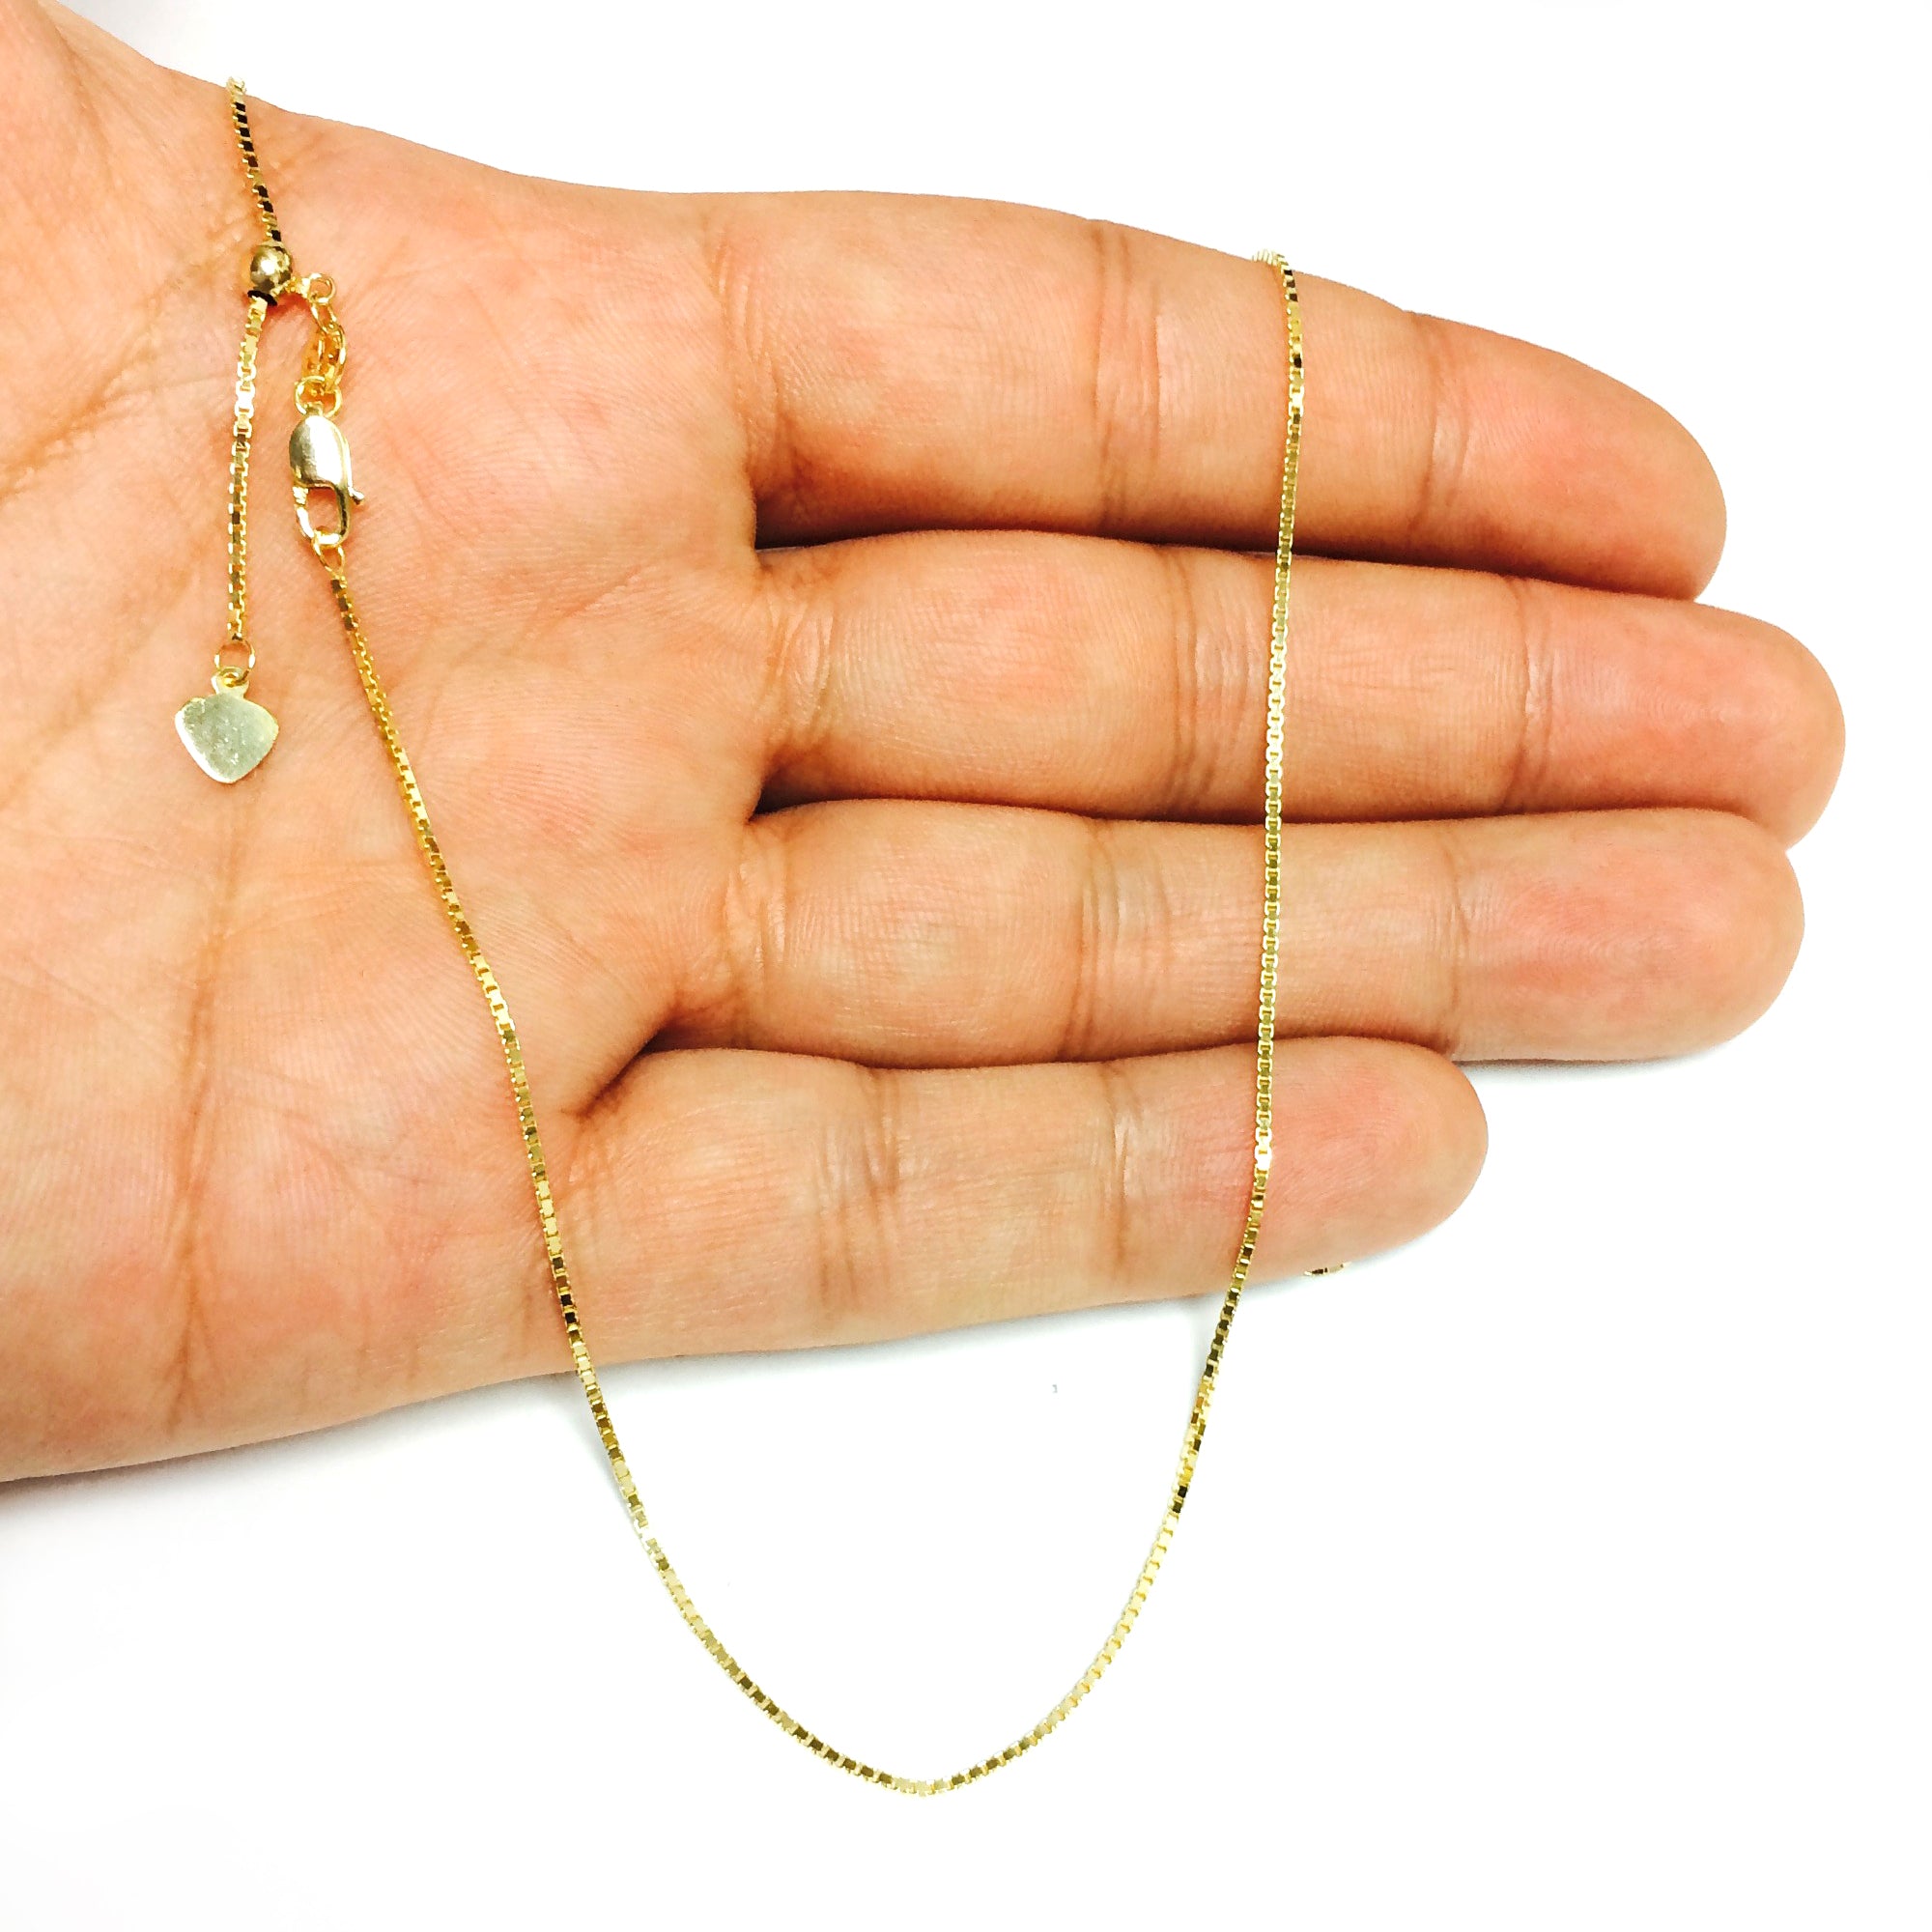 14k Yellow Gold Adjustable Box Chain Necklace, 1.15mm, 22" fine designer jewelry for men and women